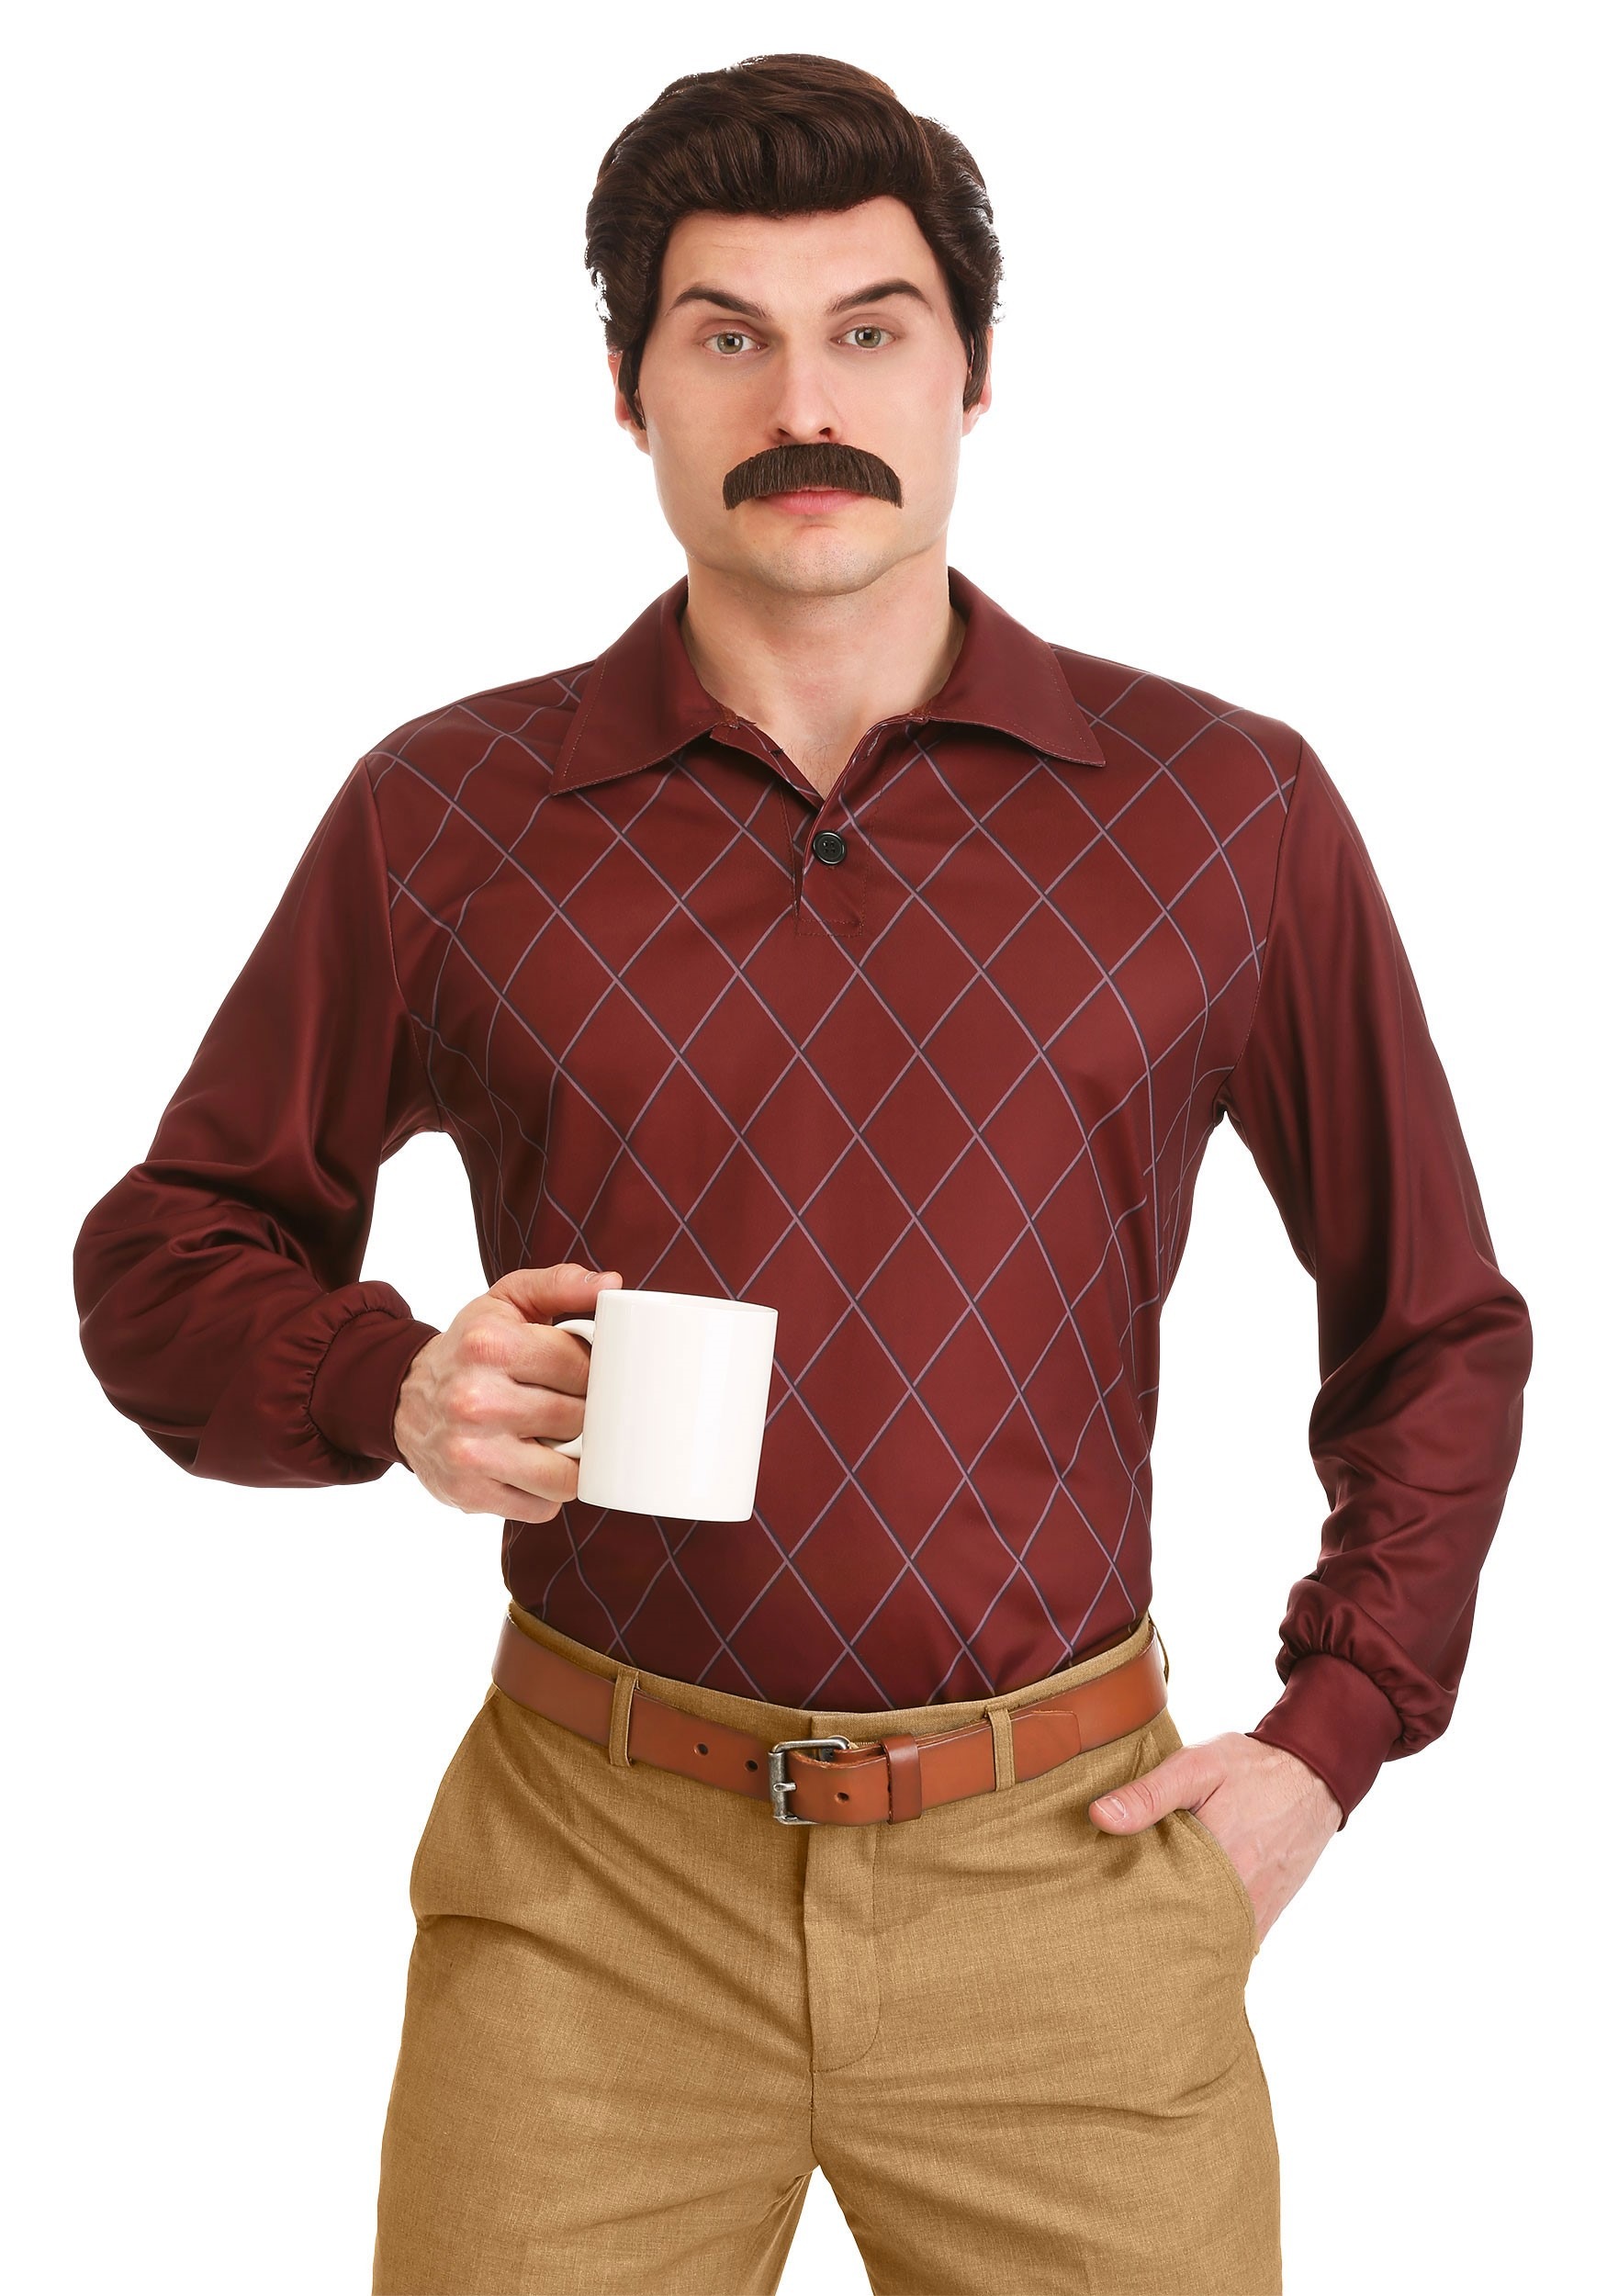 Photos - Fancy Dress A&D FUN Costumes Parks and Recreation Ron Swanson Costume for Adults Brown/ 